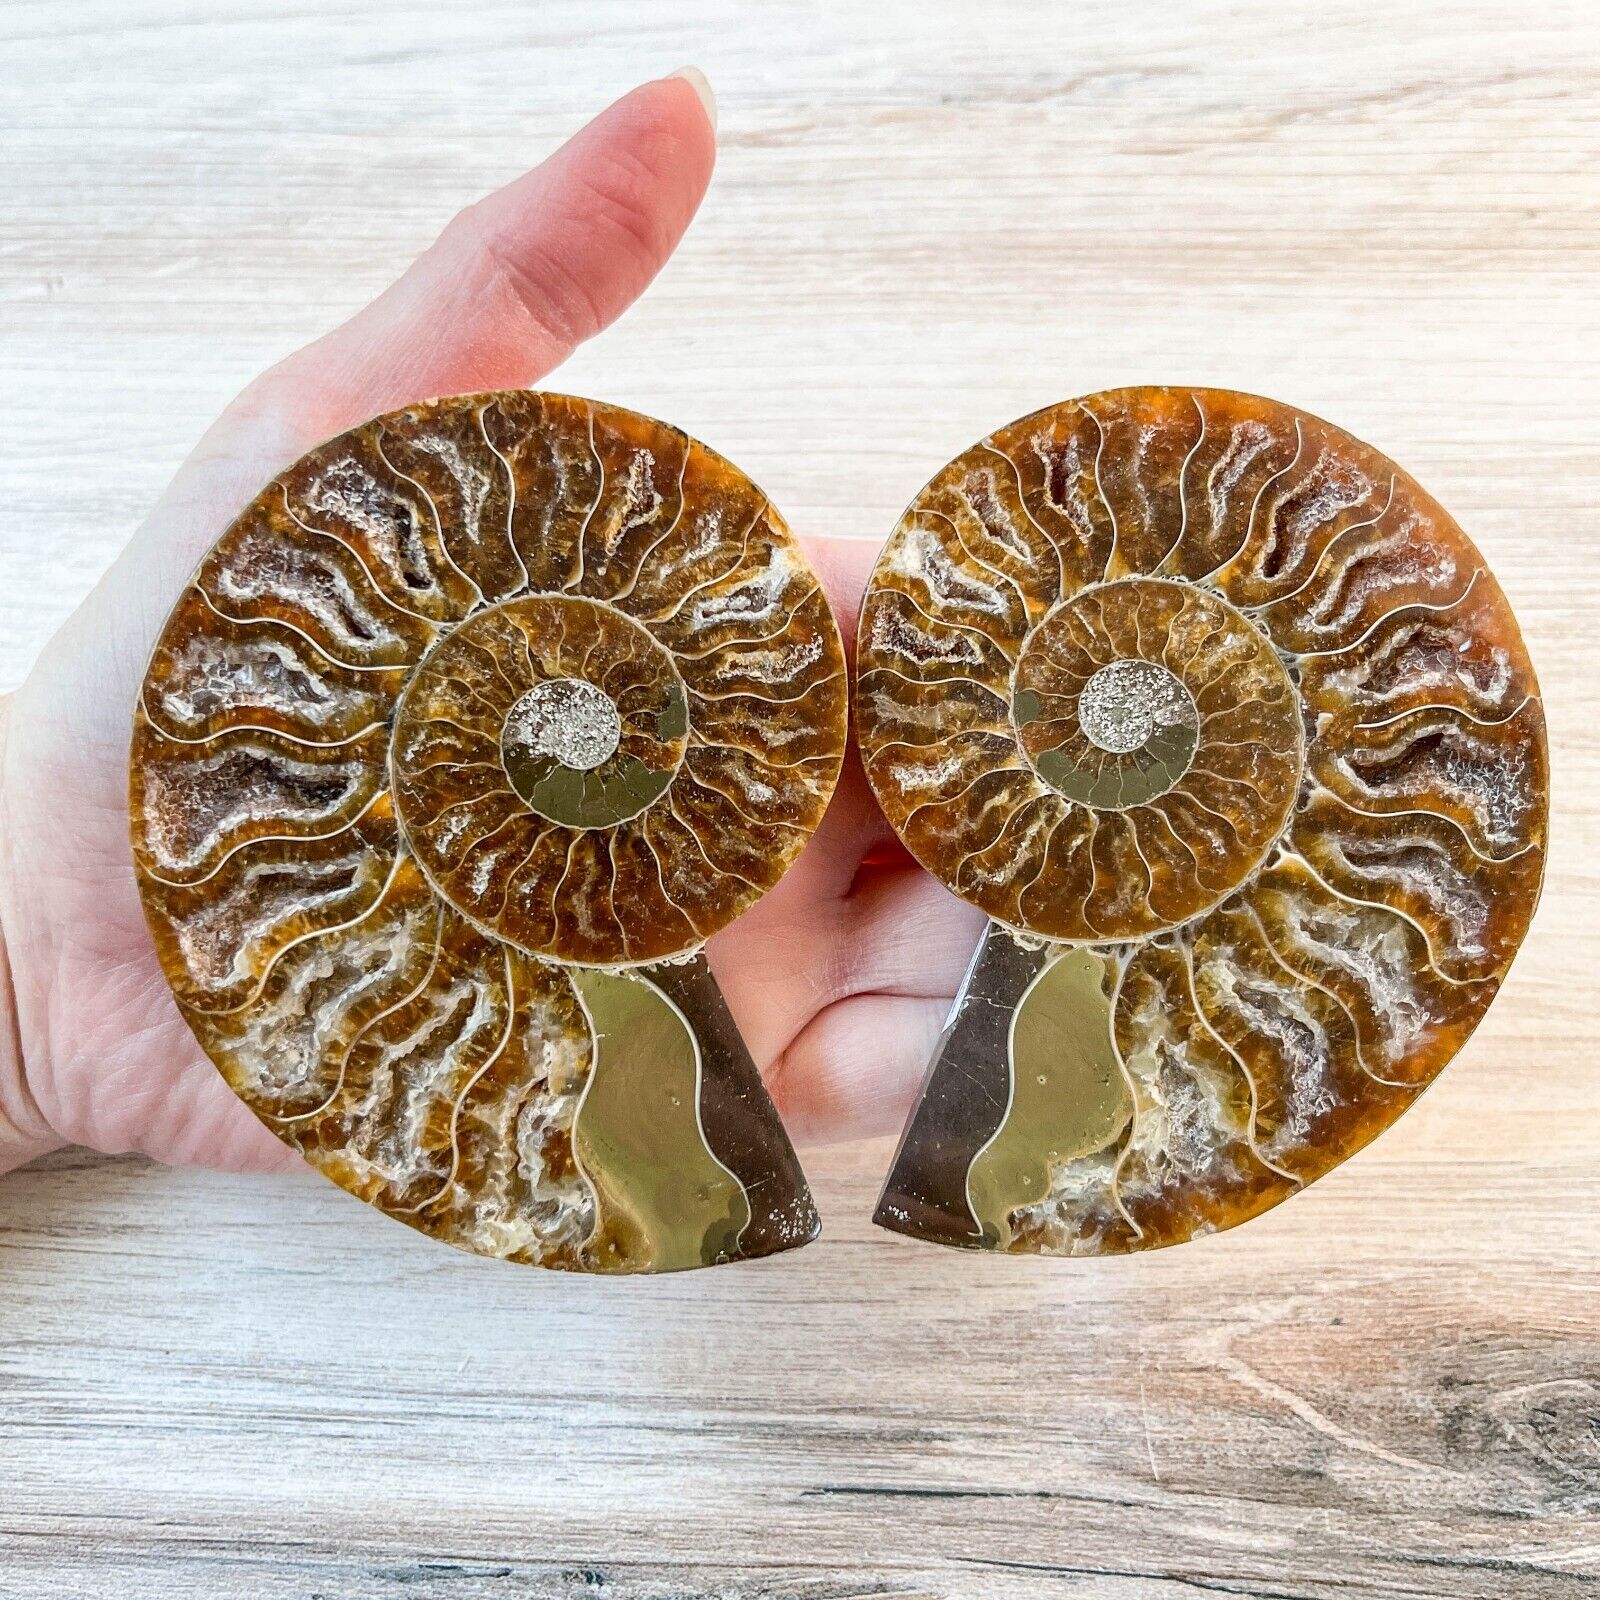 Ammonite Fossil Pair with Calcite Chambers 198g, Polished